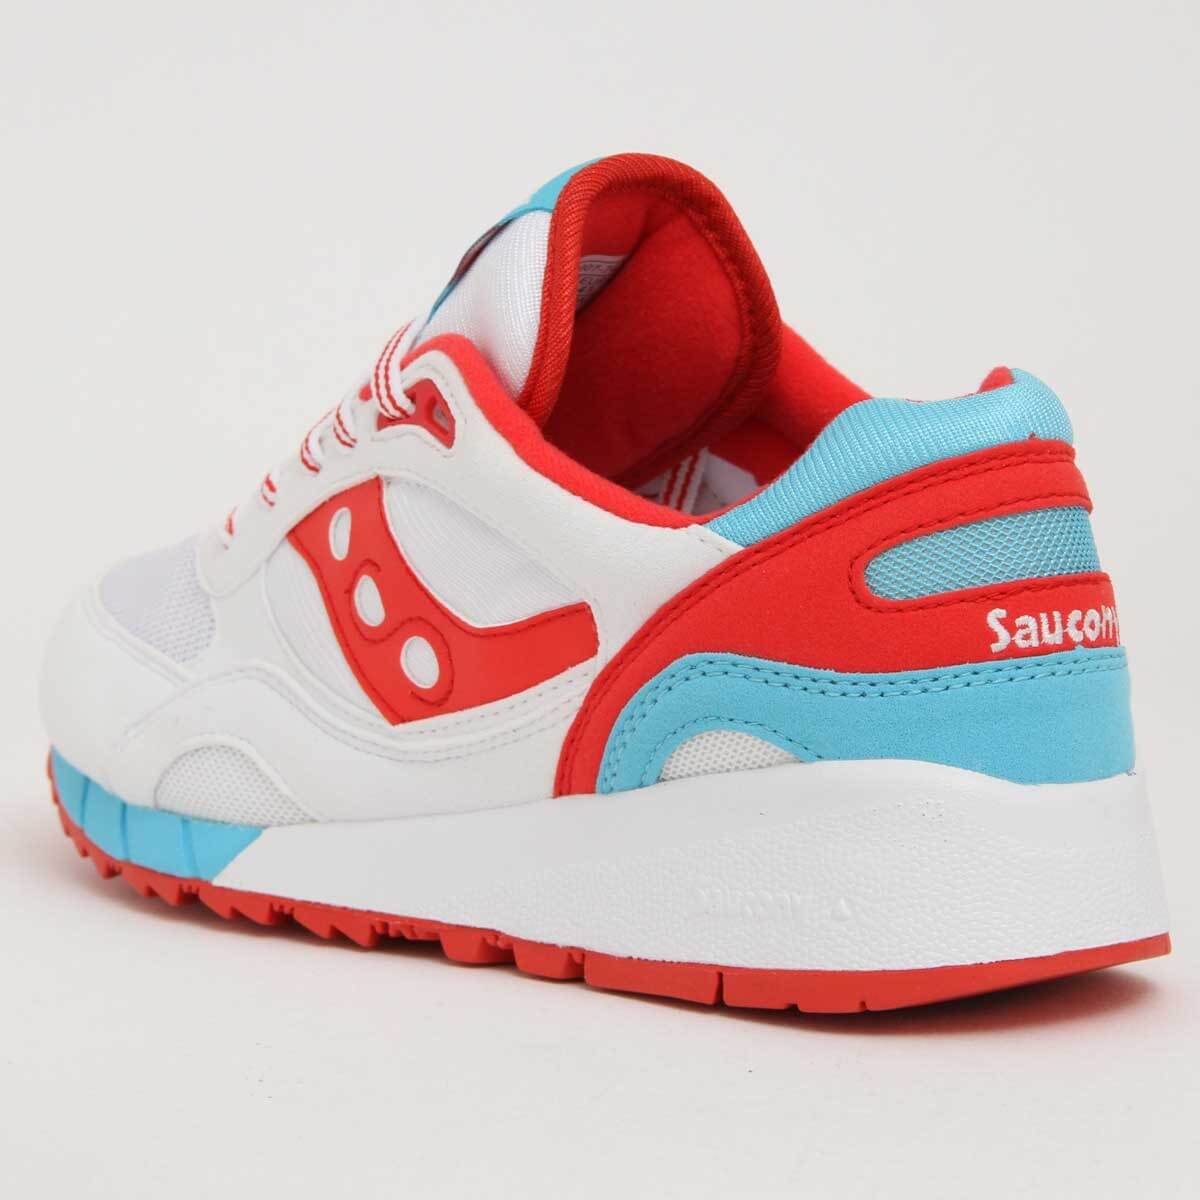 saucony 6000 white red